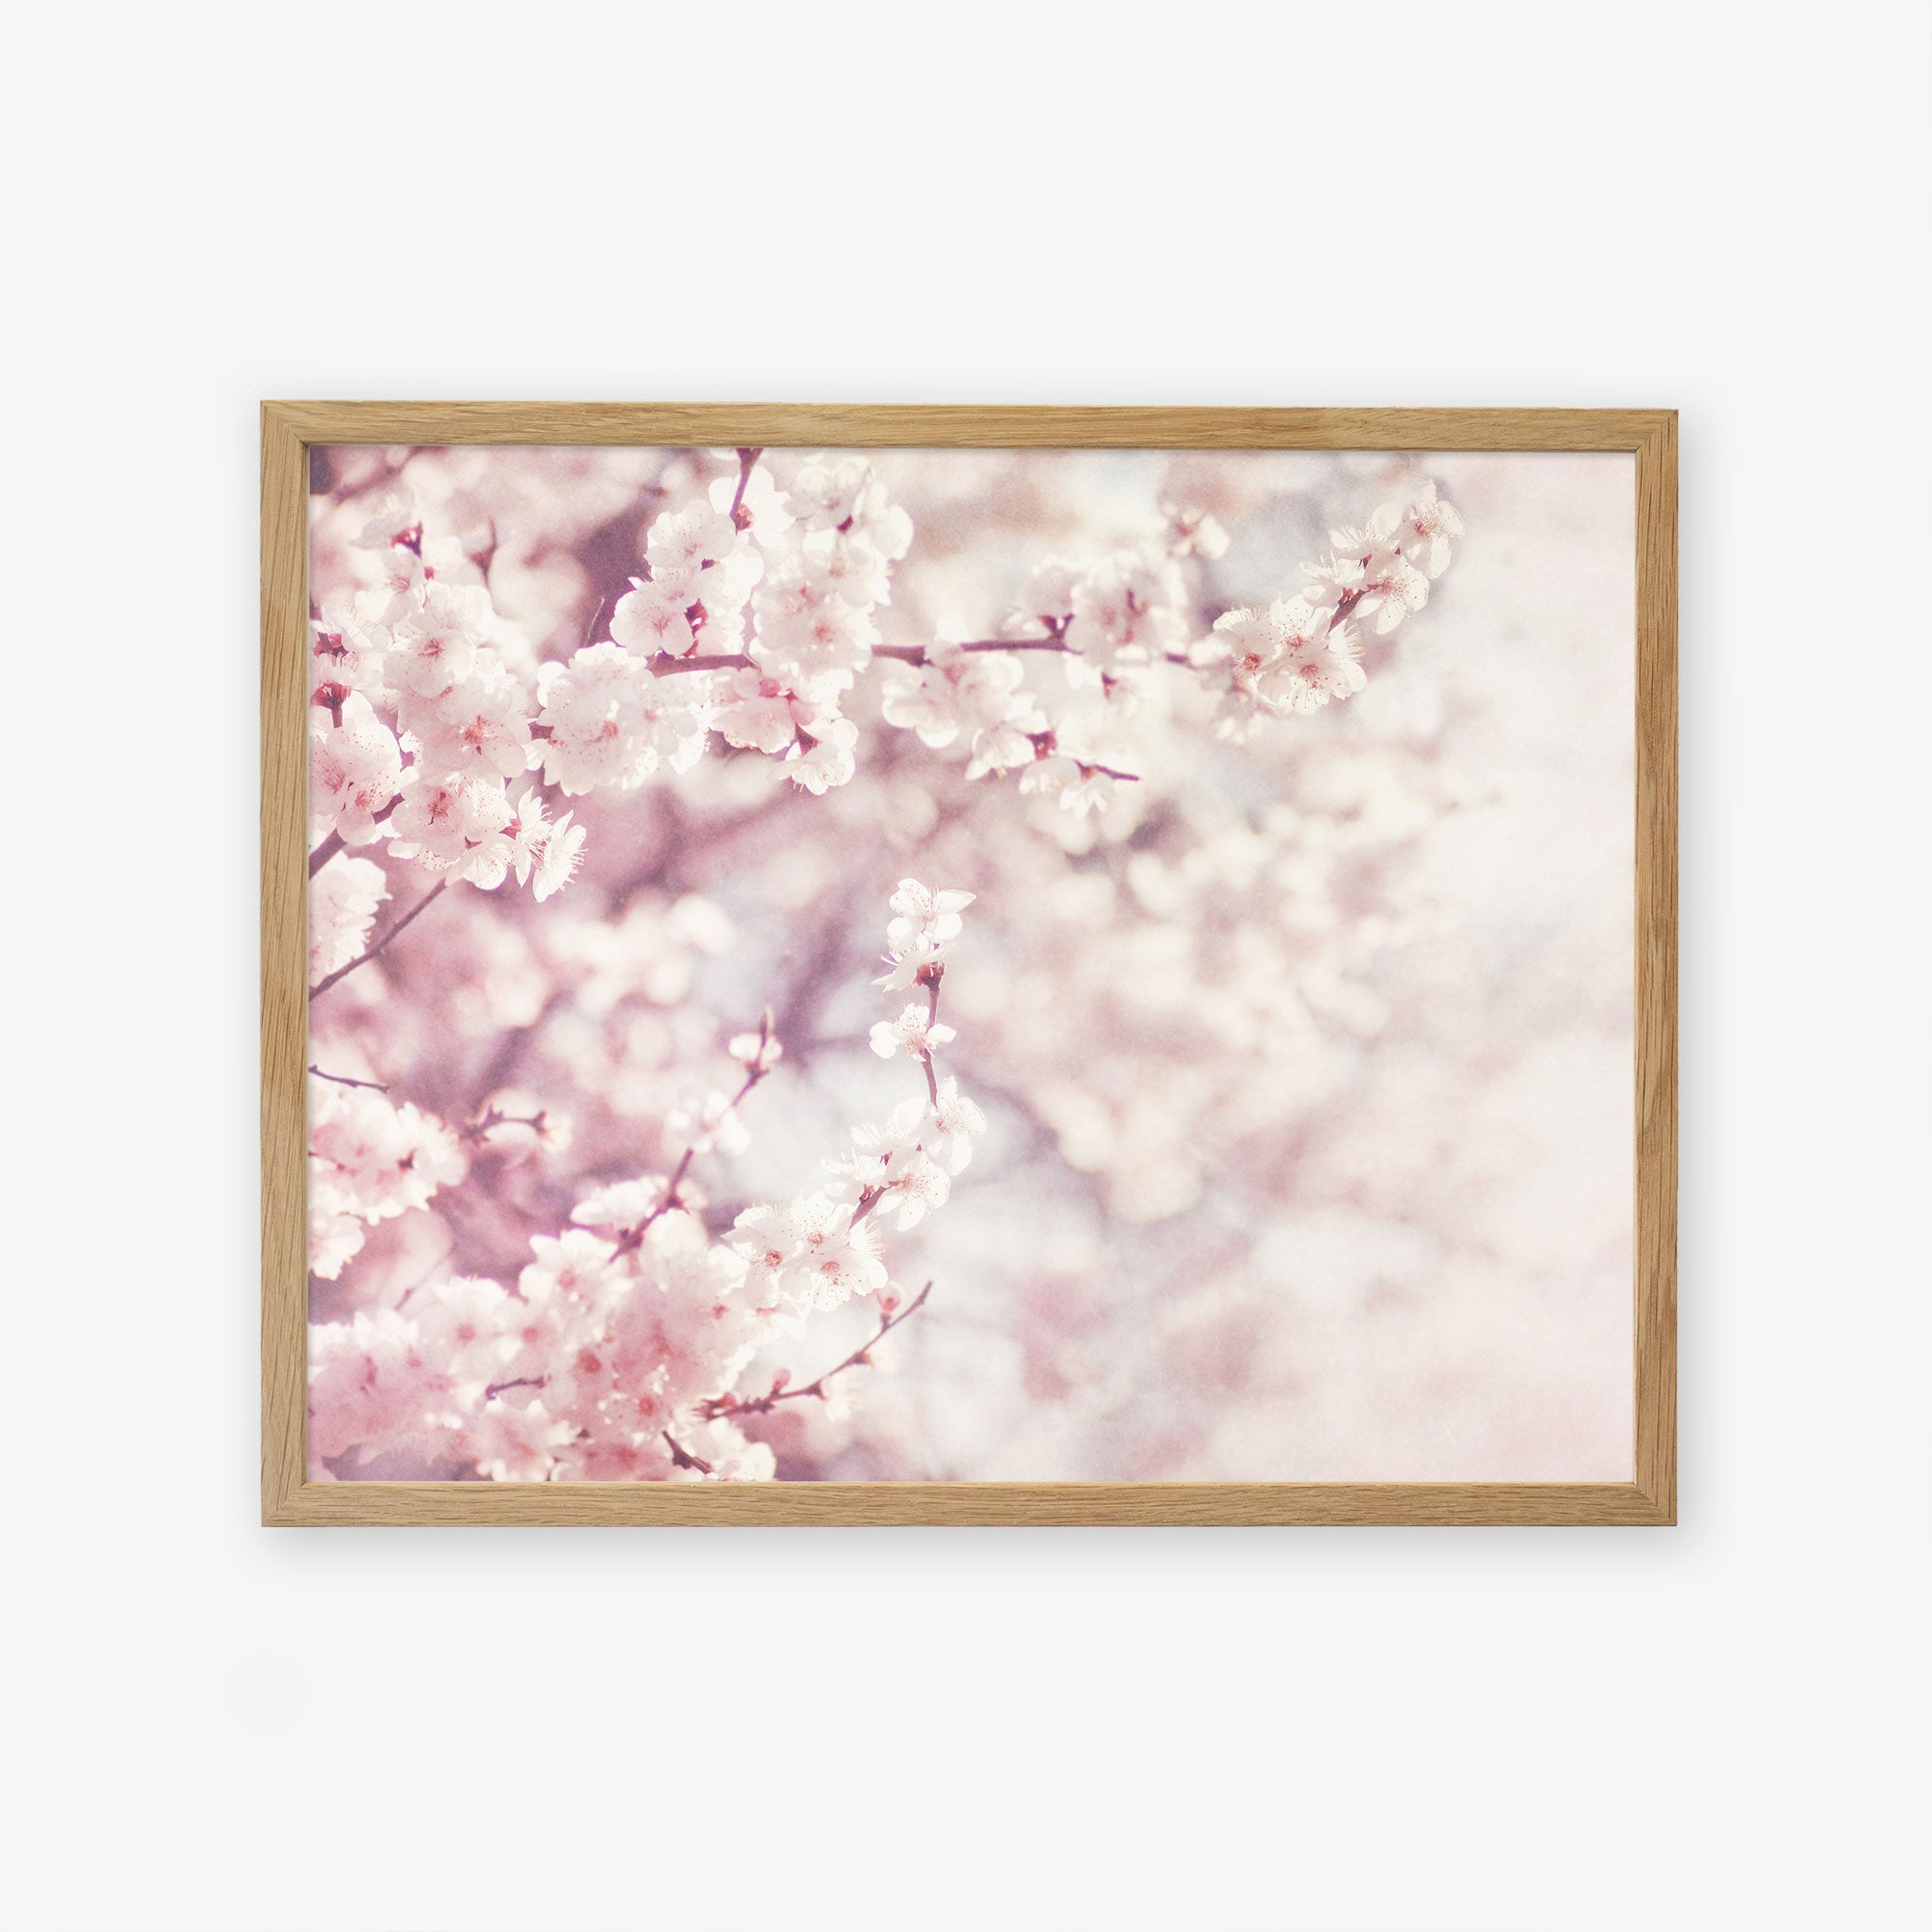 A framed wall art featuring the Pink Floral Print, &#39;Dreamy Blossom&#39; by Offley Green, with delicate shabby pink cherry blossoms in full bloom, with a soft-focus background, adding a serene and spring-like feel to the décor.